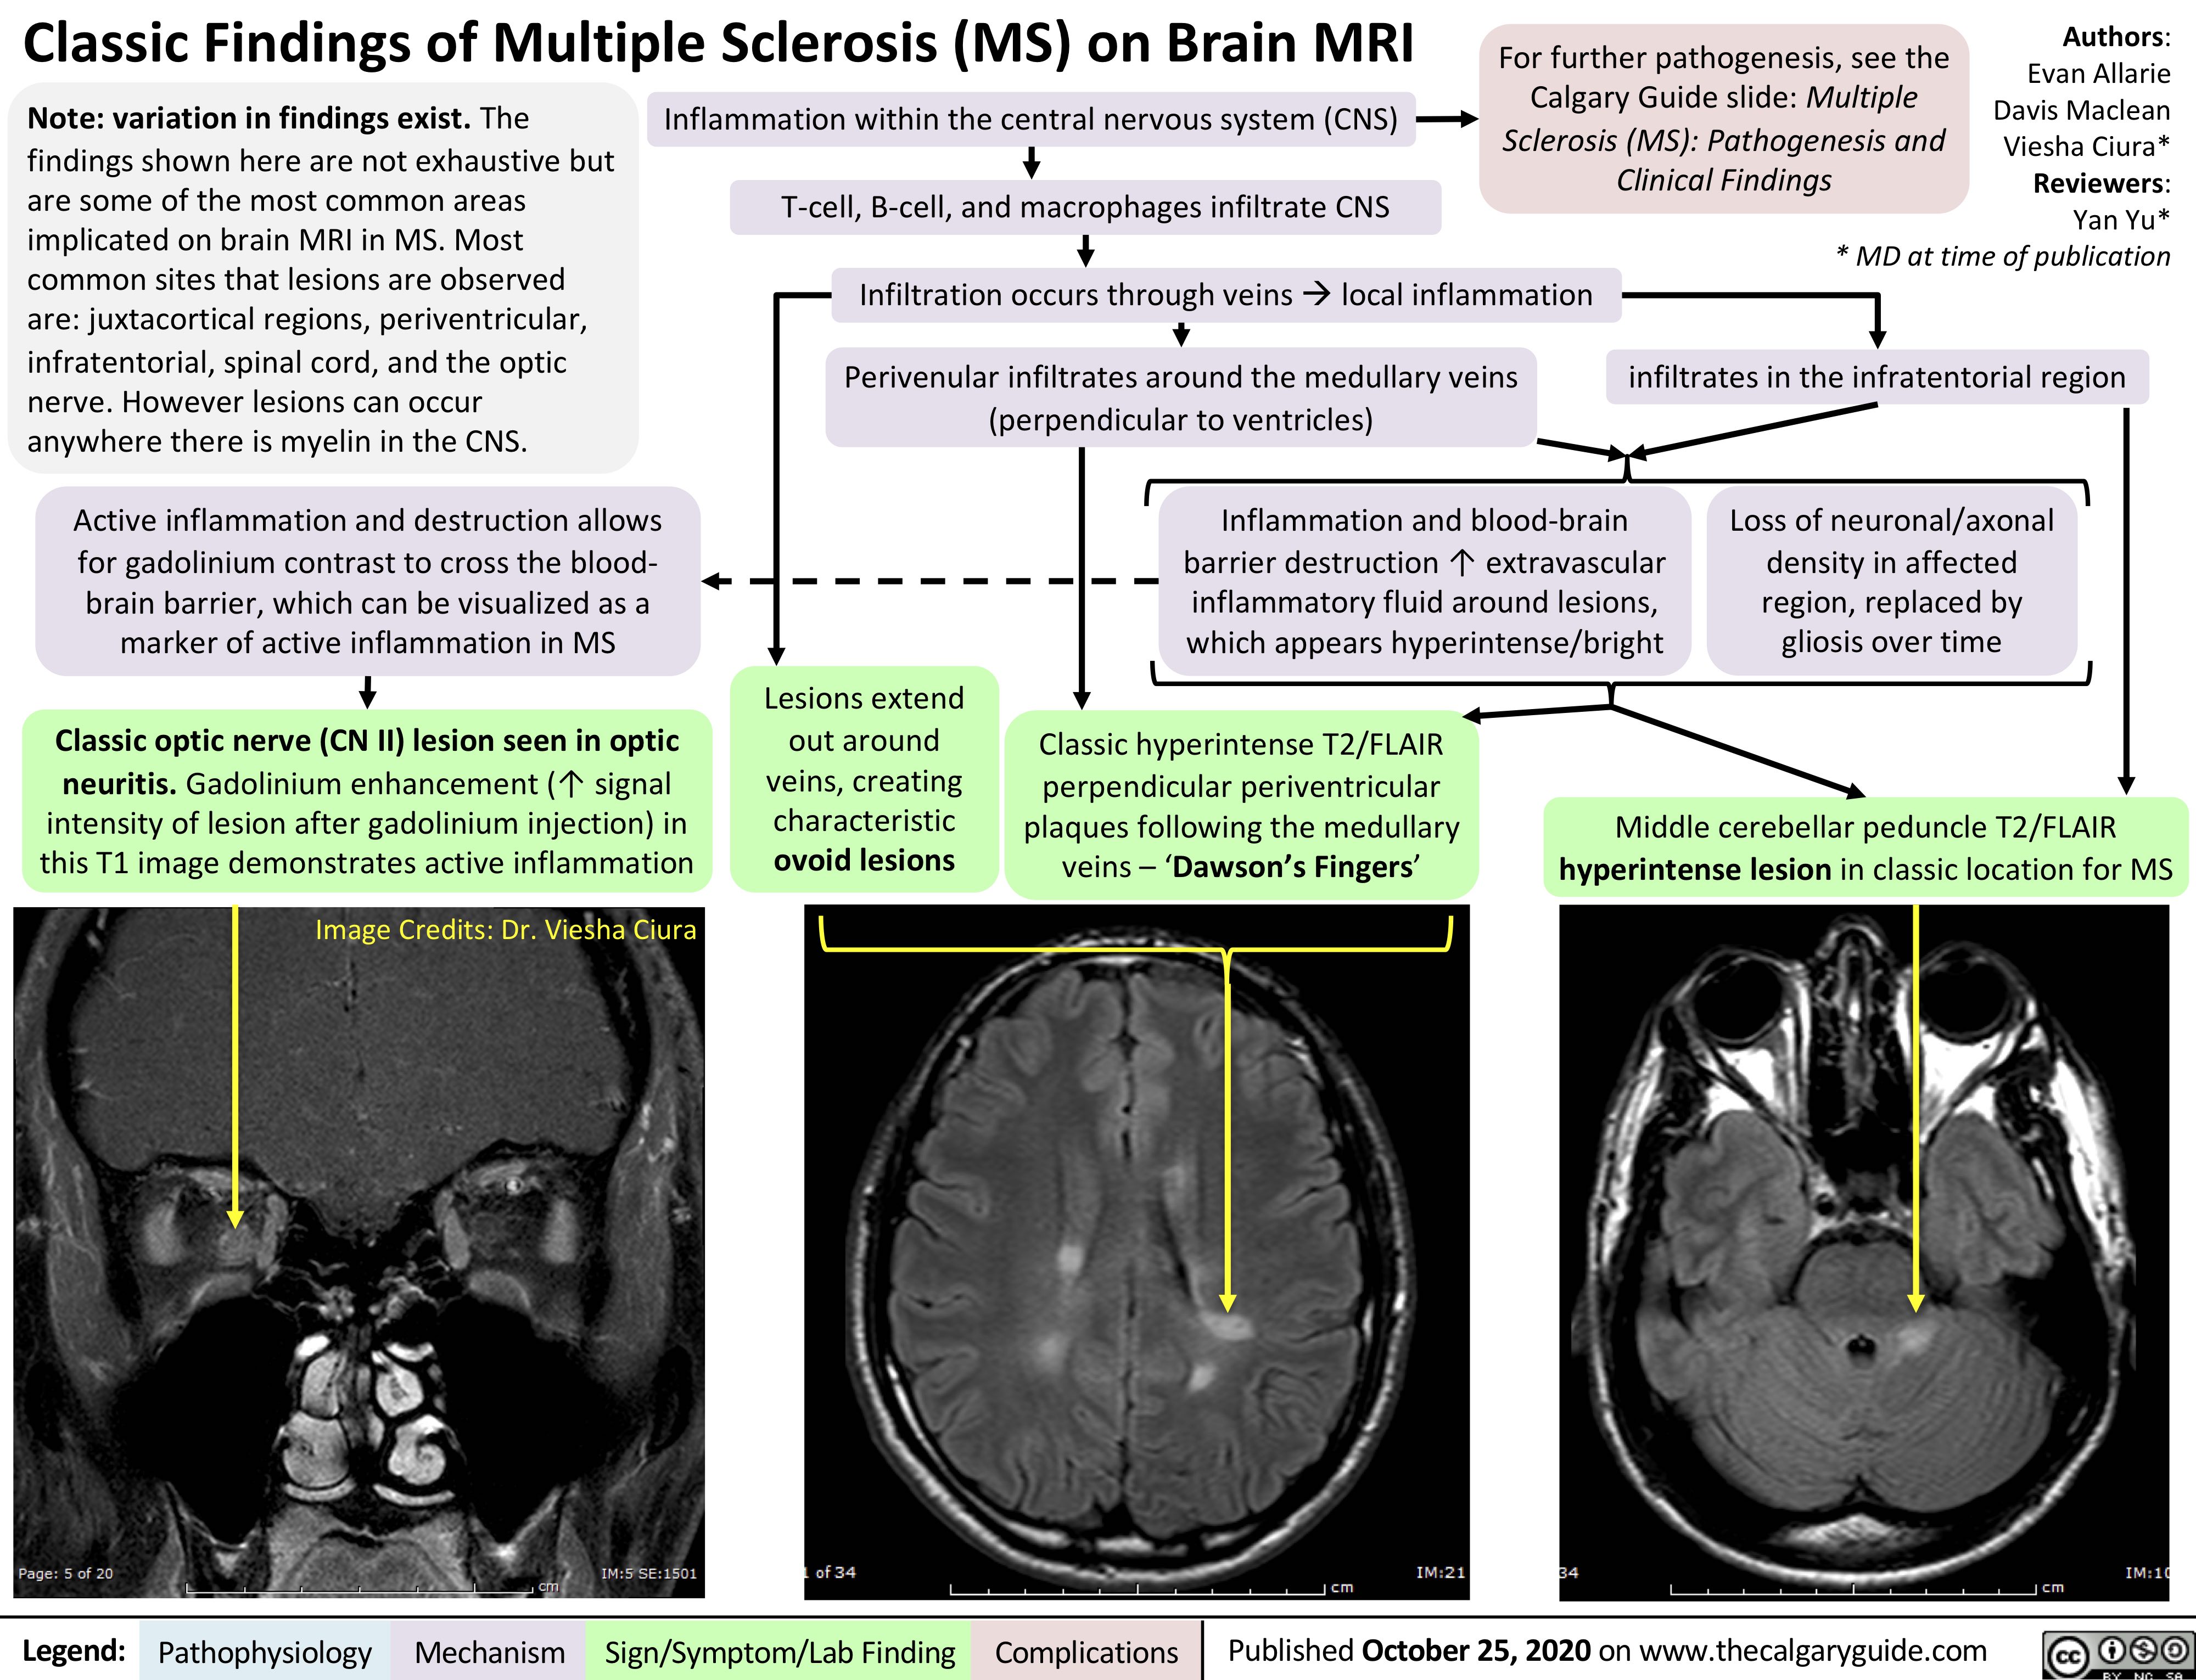 Classic Findings of Multiple Sclerosis (MS) on Brain MRI
Authors: Evan Allarie Davis Maclean Viesha Ciura* Reviewers: Yan Yu* * MD at time of publication
infiltrates in the infratentorial region
   Note: variation in findings exist. The findings shown here are not exhaustive but are some of the most common areas implicated on brain MRI in MS. Most common sites that lesions are observed are: juxtacortical regions, periventricular, infratentorial, spinal cord, and the optic nerve. However lesions can occur anywhere there is myelin in the CNS.
Active inflammation and destruction allows for gadolinium contrast to cross the blood- brain barrier, which can be visualized as a marker of active inflammation in MS
Classic optic nerve (CN II) lesion seen in optic neuritis. Gadolinium enhancement (↑ signal
intensity of lesion after gadolinium injection) in this T1 image demonstrates active inflammation
Image Credits: Dr. Viesha Ciura
For further pathogenesis, see the Calgary Guide slide: Multiple Sclerosis (MS): Pathogenesis and Clinical Findings
Inflammation within the central nervous system (CNS) T-cell, B-cell, and macrophages infiltrate CNS
     Infiltration occurs through veinsàlocal inflammation Perivenular infiltrates around the medullary veins
     (perpendicular to ventricles)
Inflammation and blood-brain barrier destruction ↑ extravascular inflammatory fluid around lesions, which appears hyperintense/bright
Loss of neuronal/axonal density in affected region, replaced by gliosis over time
          Lesions extend out around veins, creating characteristic ovoid lesions
Classic hyperintense T2/FLAIR perpendicular periventricular plaques following the medullary veins – ‘Dawson’s Fingers’
Middle cerebellar peduncle T2/FLAIR hyperintense lesion in classic location for MS
             Legend:
 Pathophysiology
Mechanism
Sign/Symptom/Lab Finding
  Complications
Published October 25, 2020 on www.thecalgaryguide.com
    